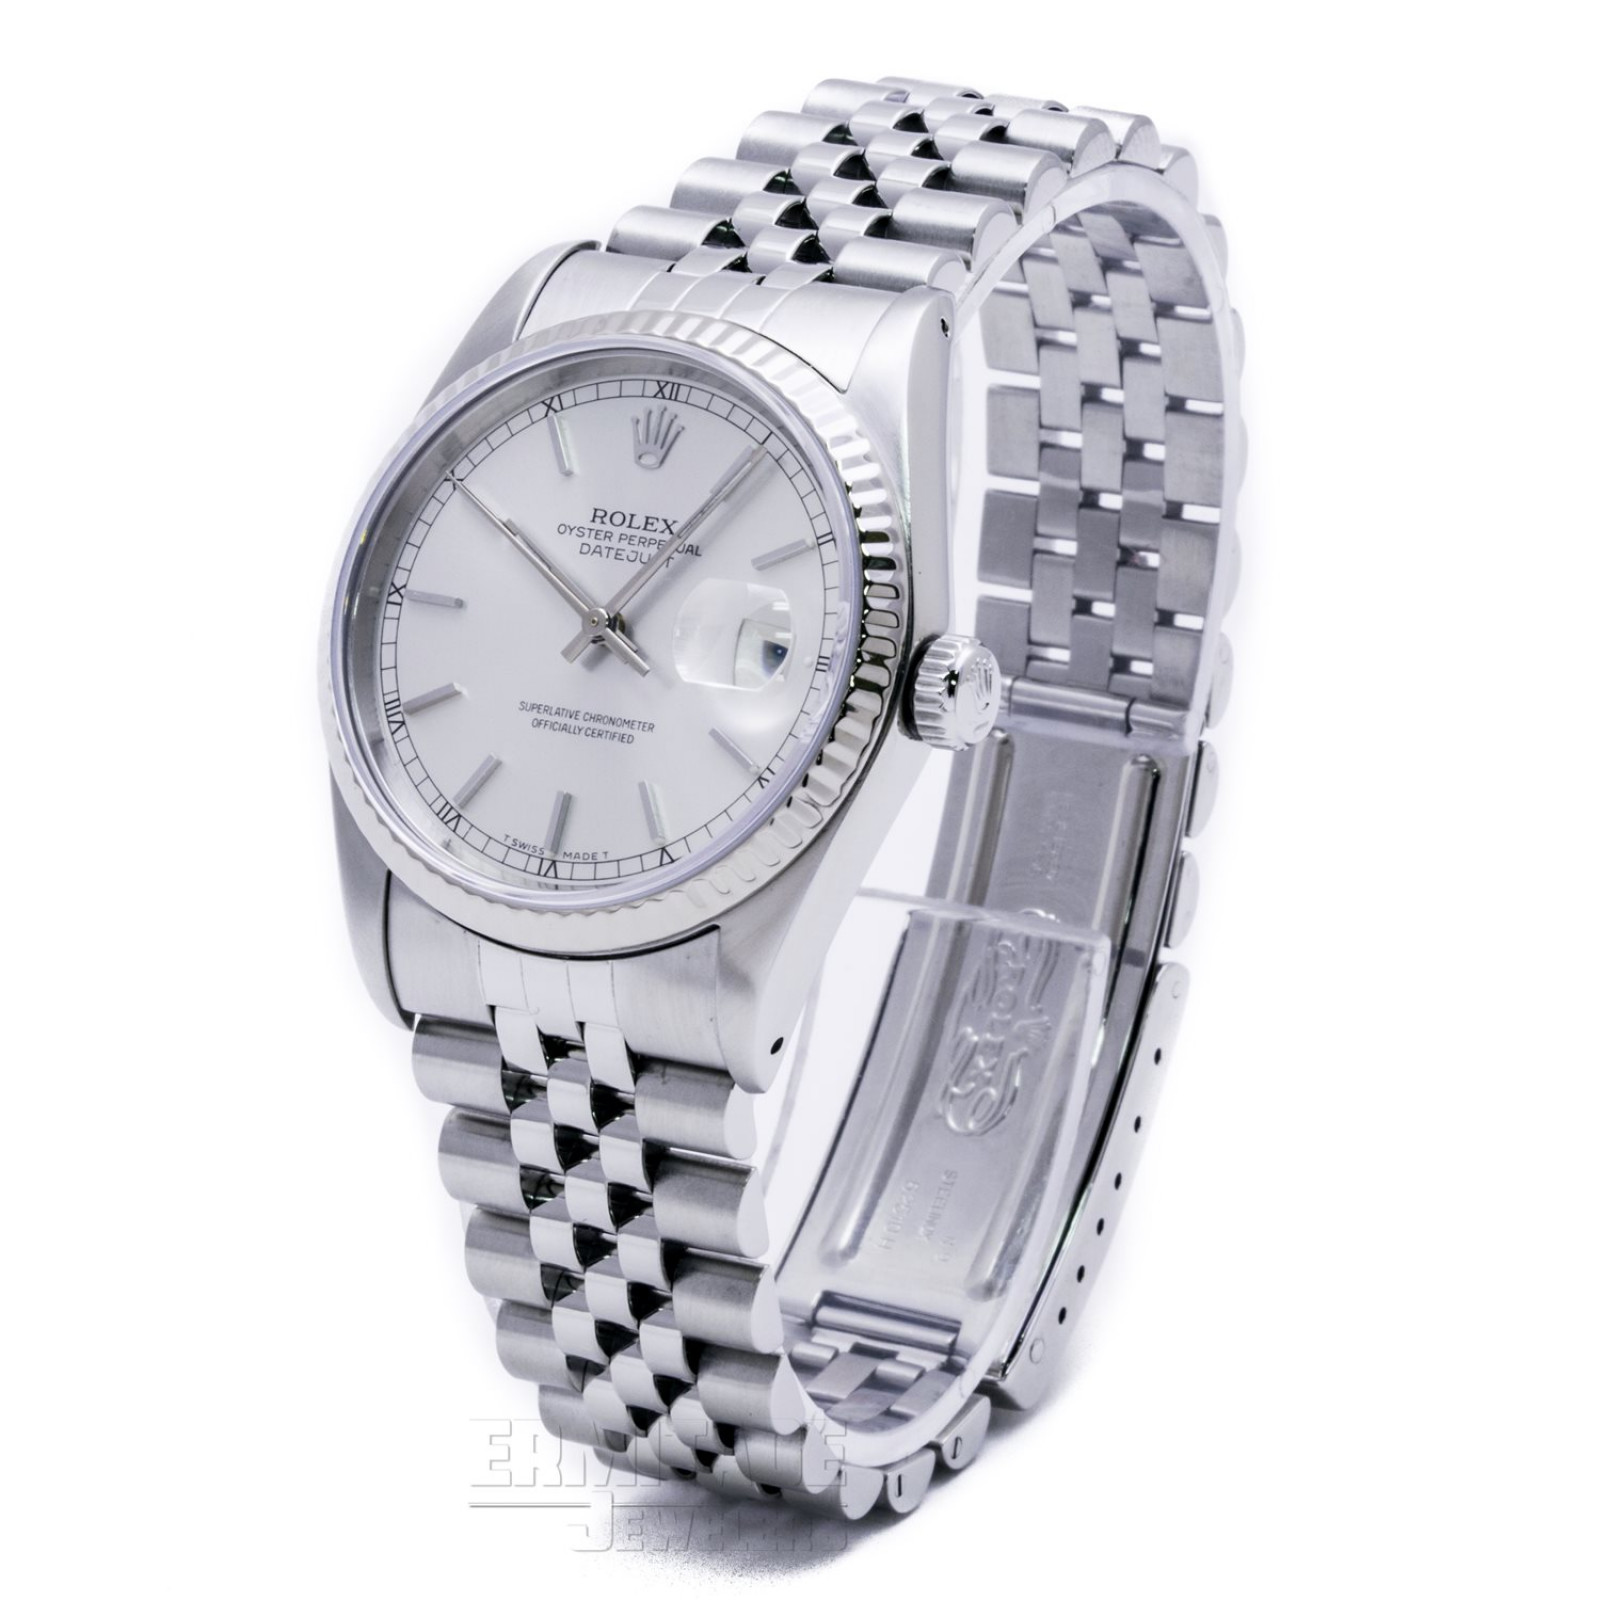 Rolex Datejust 16234 White Gold & Steel on Oyster